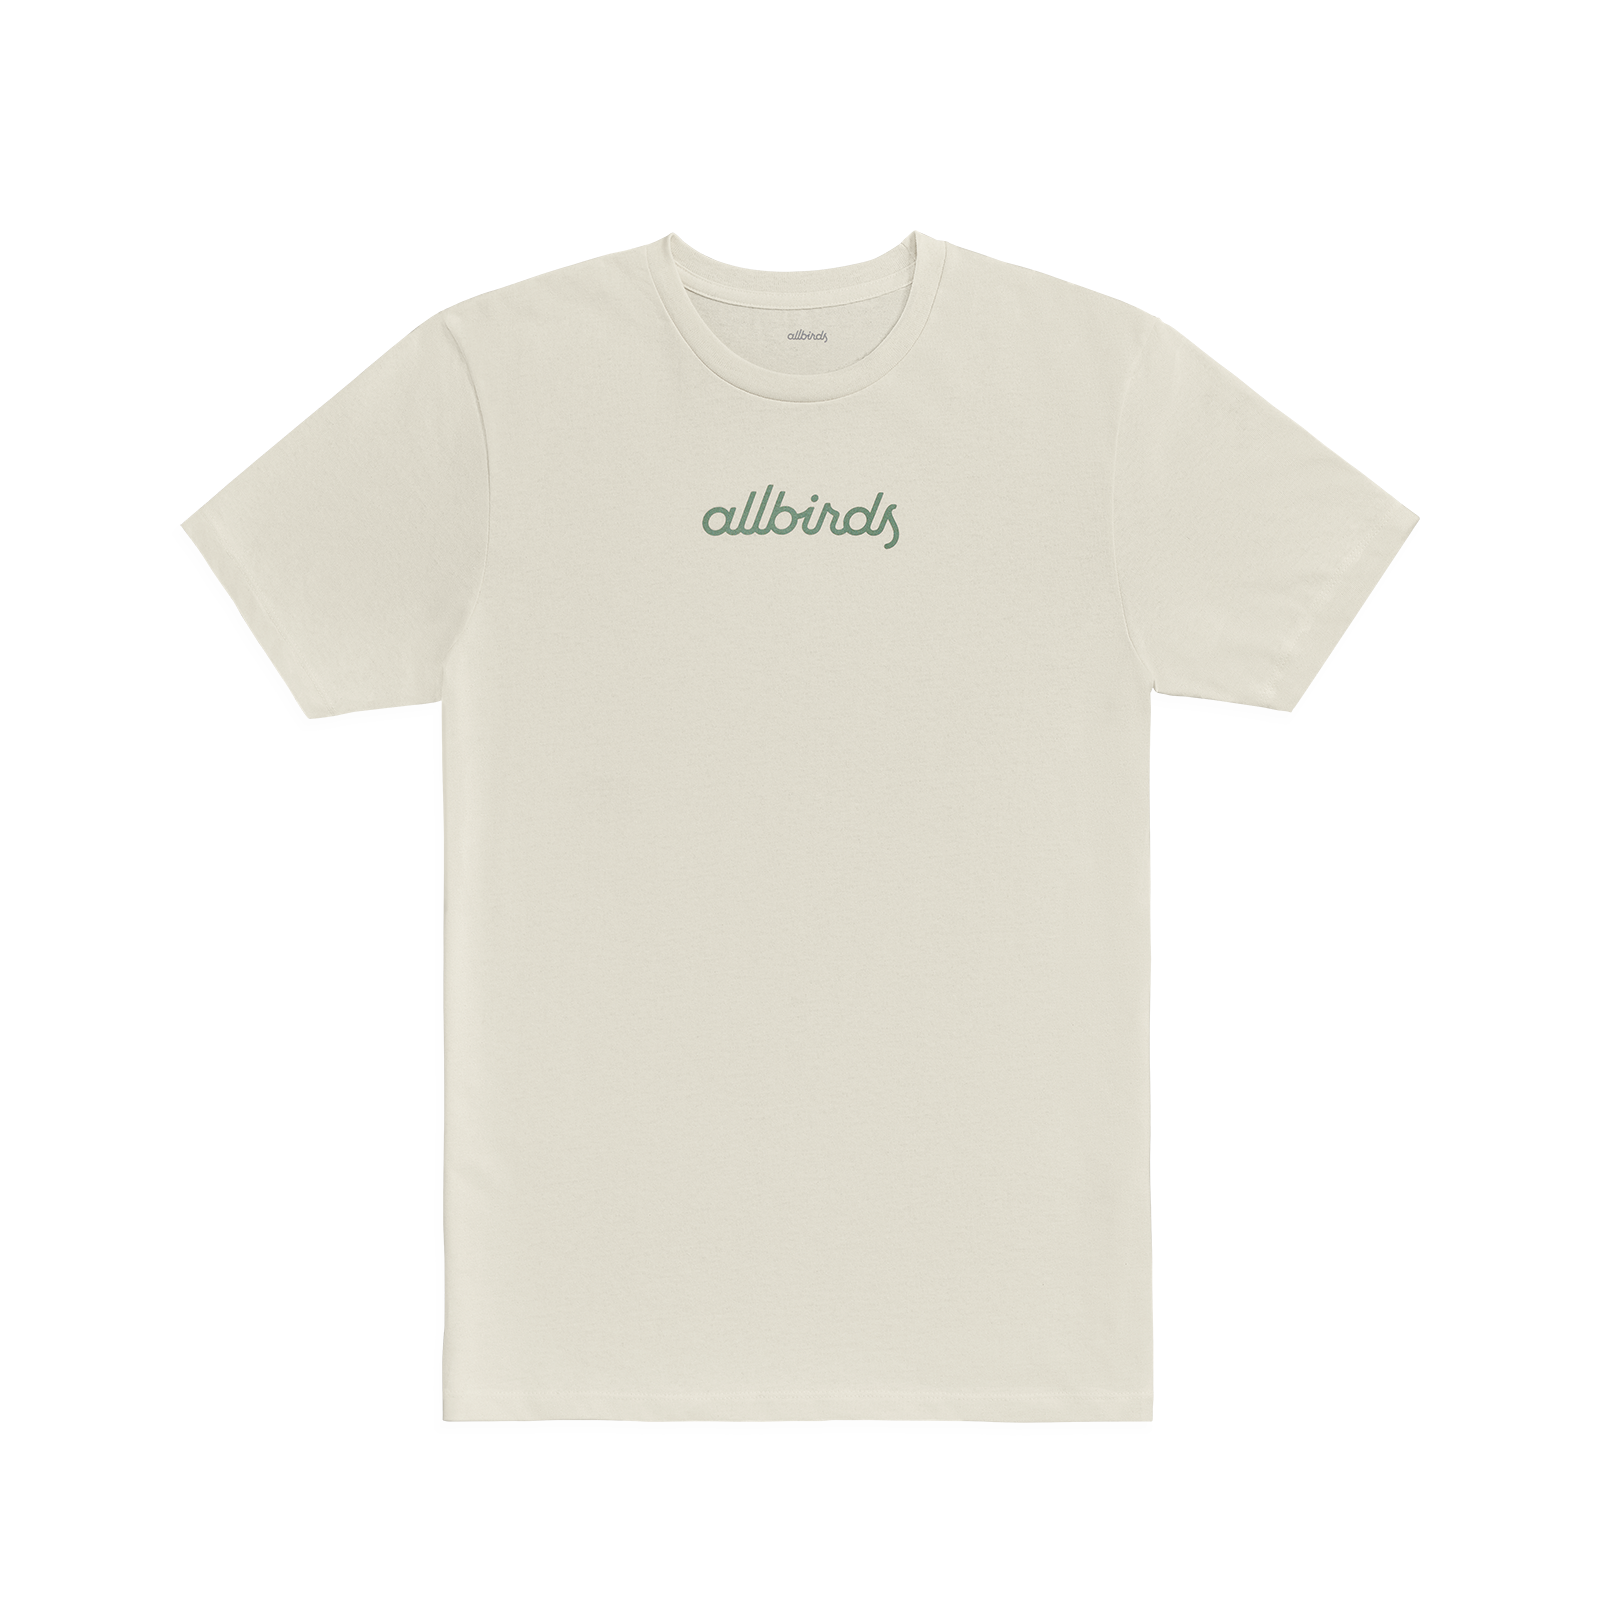 Allbirds Men's Clothing - Shirts, Sweaters, Jackets & more ...